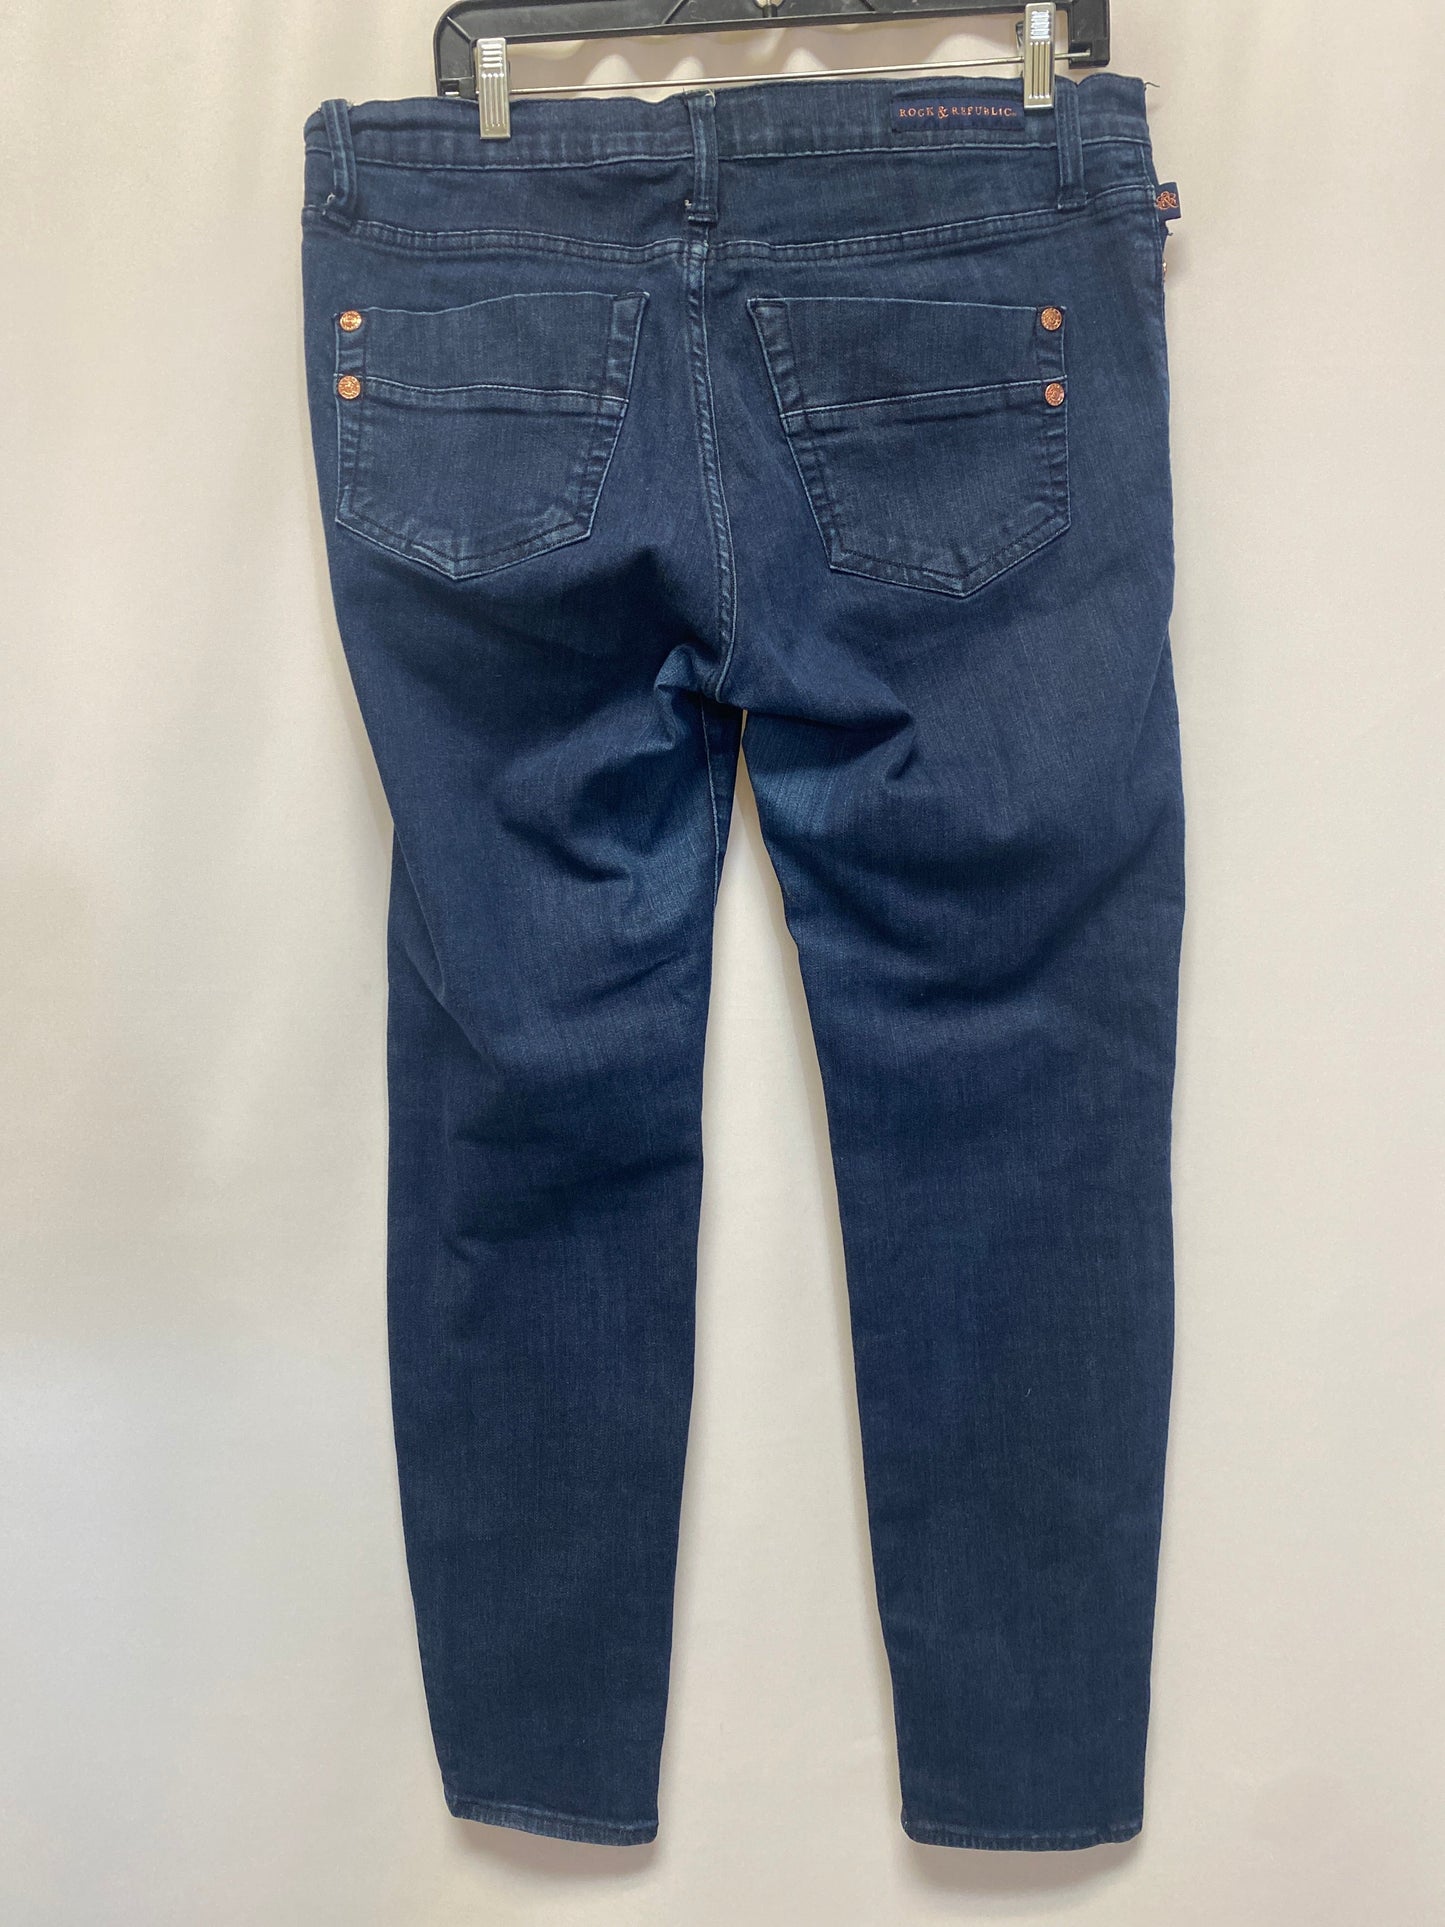 Jeans Skinny By Rock And Republic  Size: 16